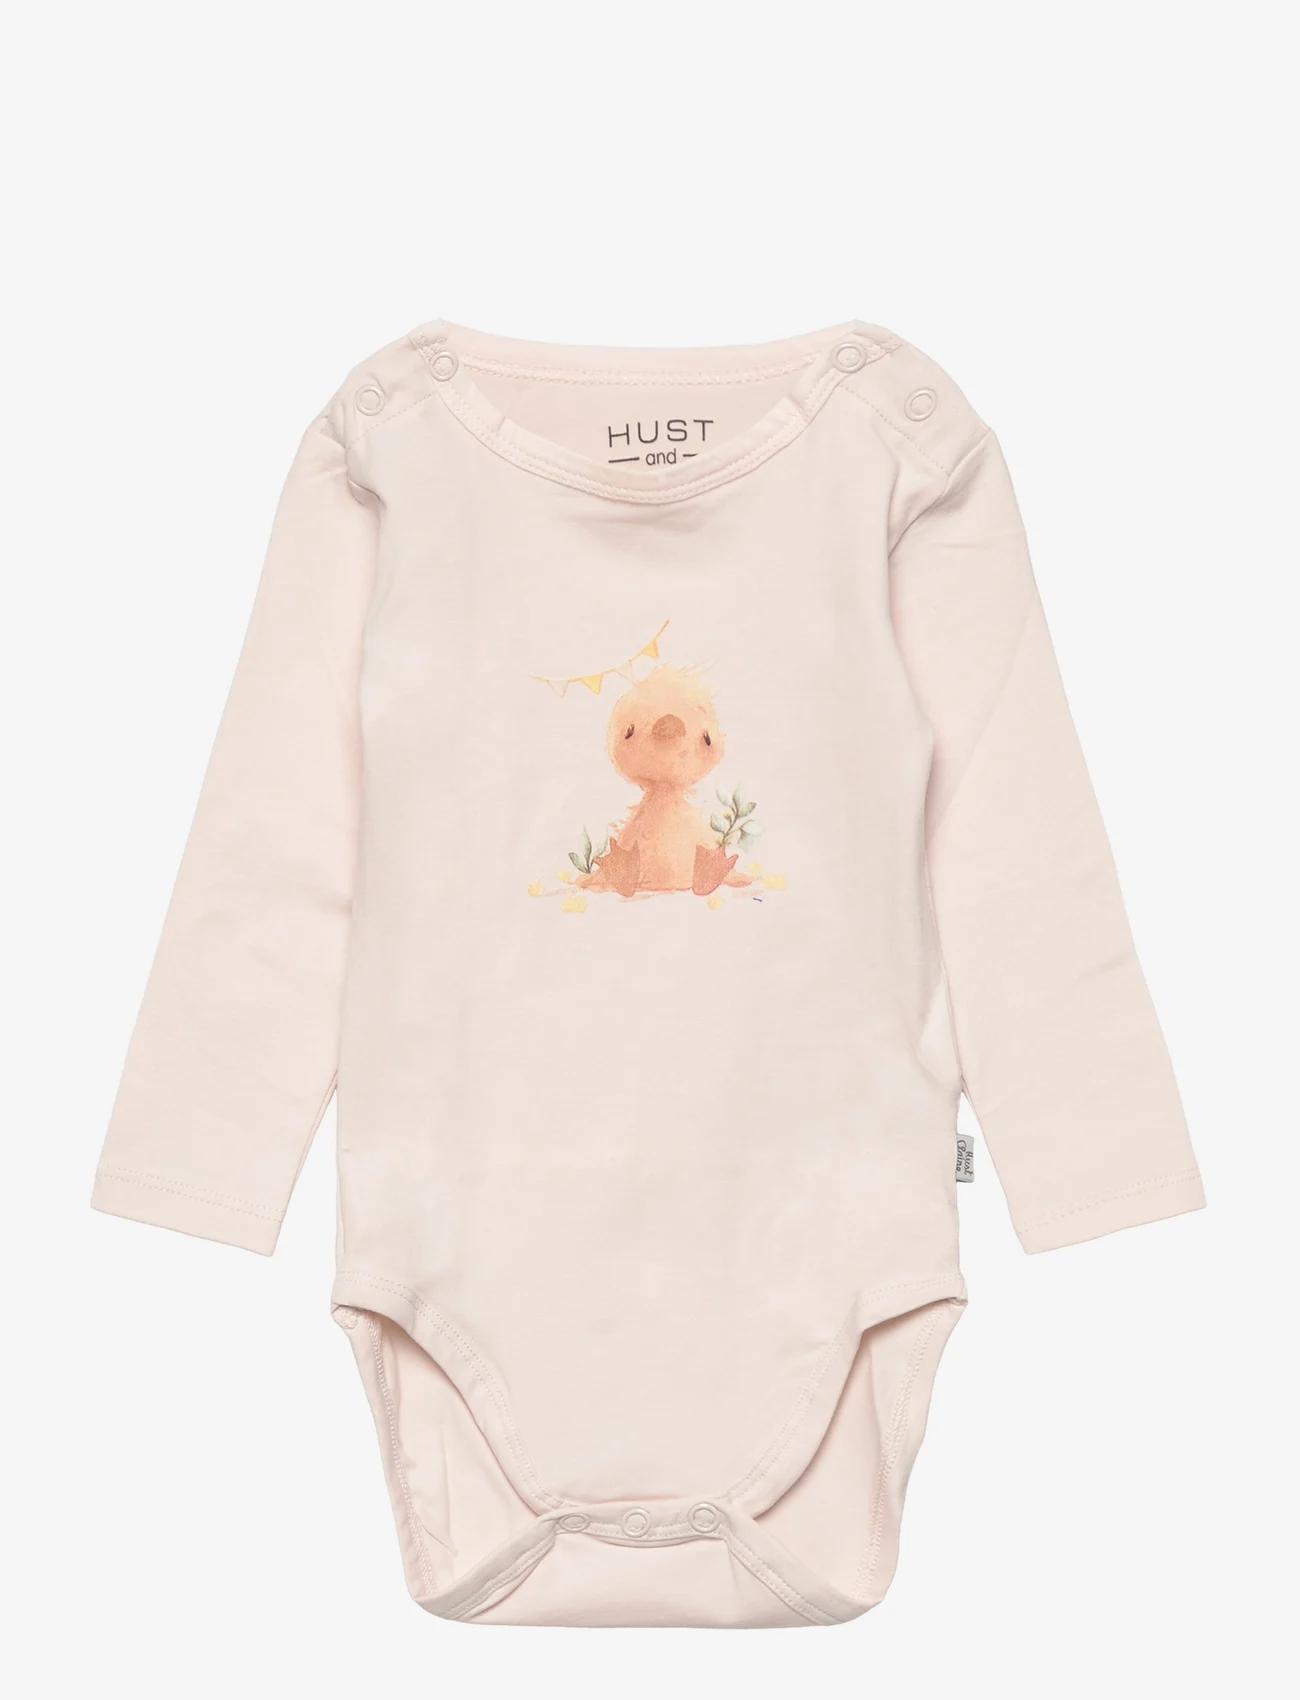 Hust & Claire - Bebe - summer savings - soft pink - 0